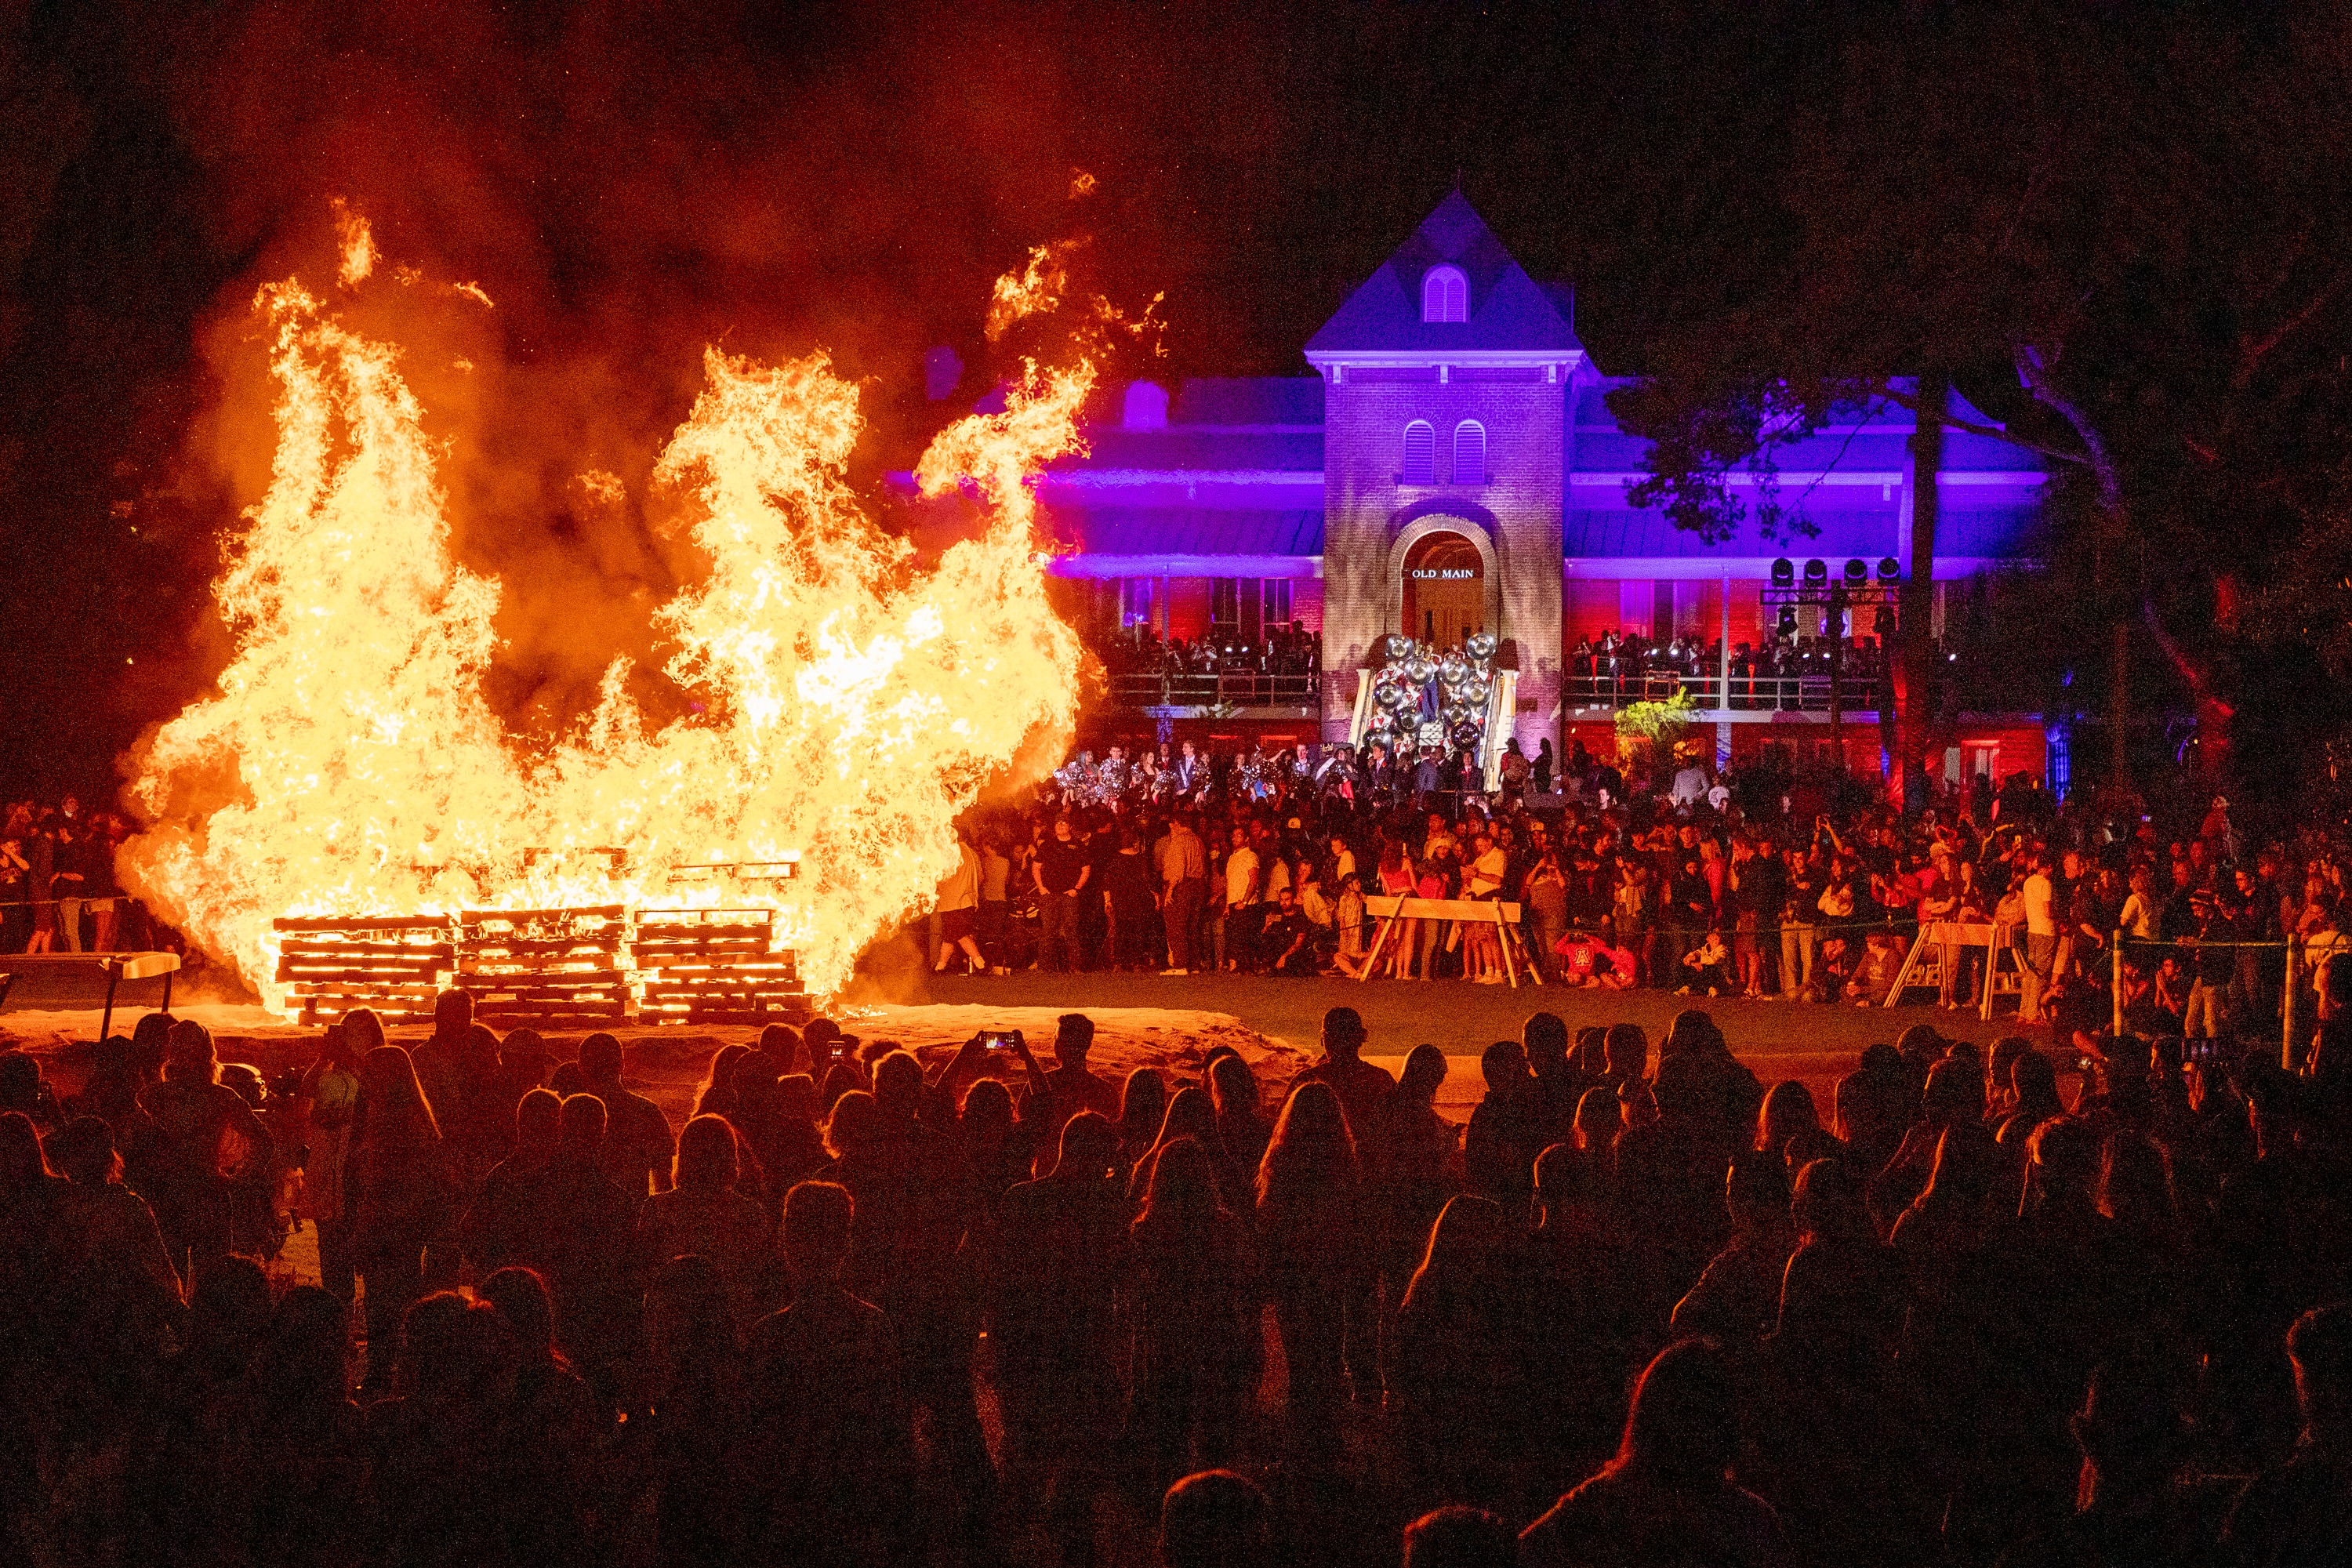 Large bonfire in front of Old Main with crowd surrounding it